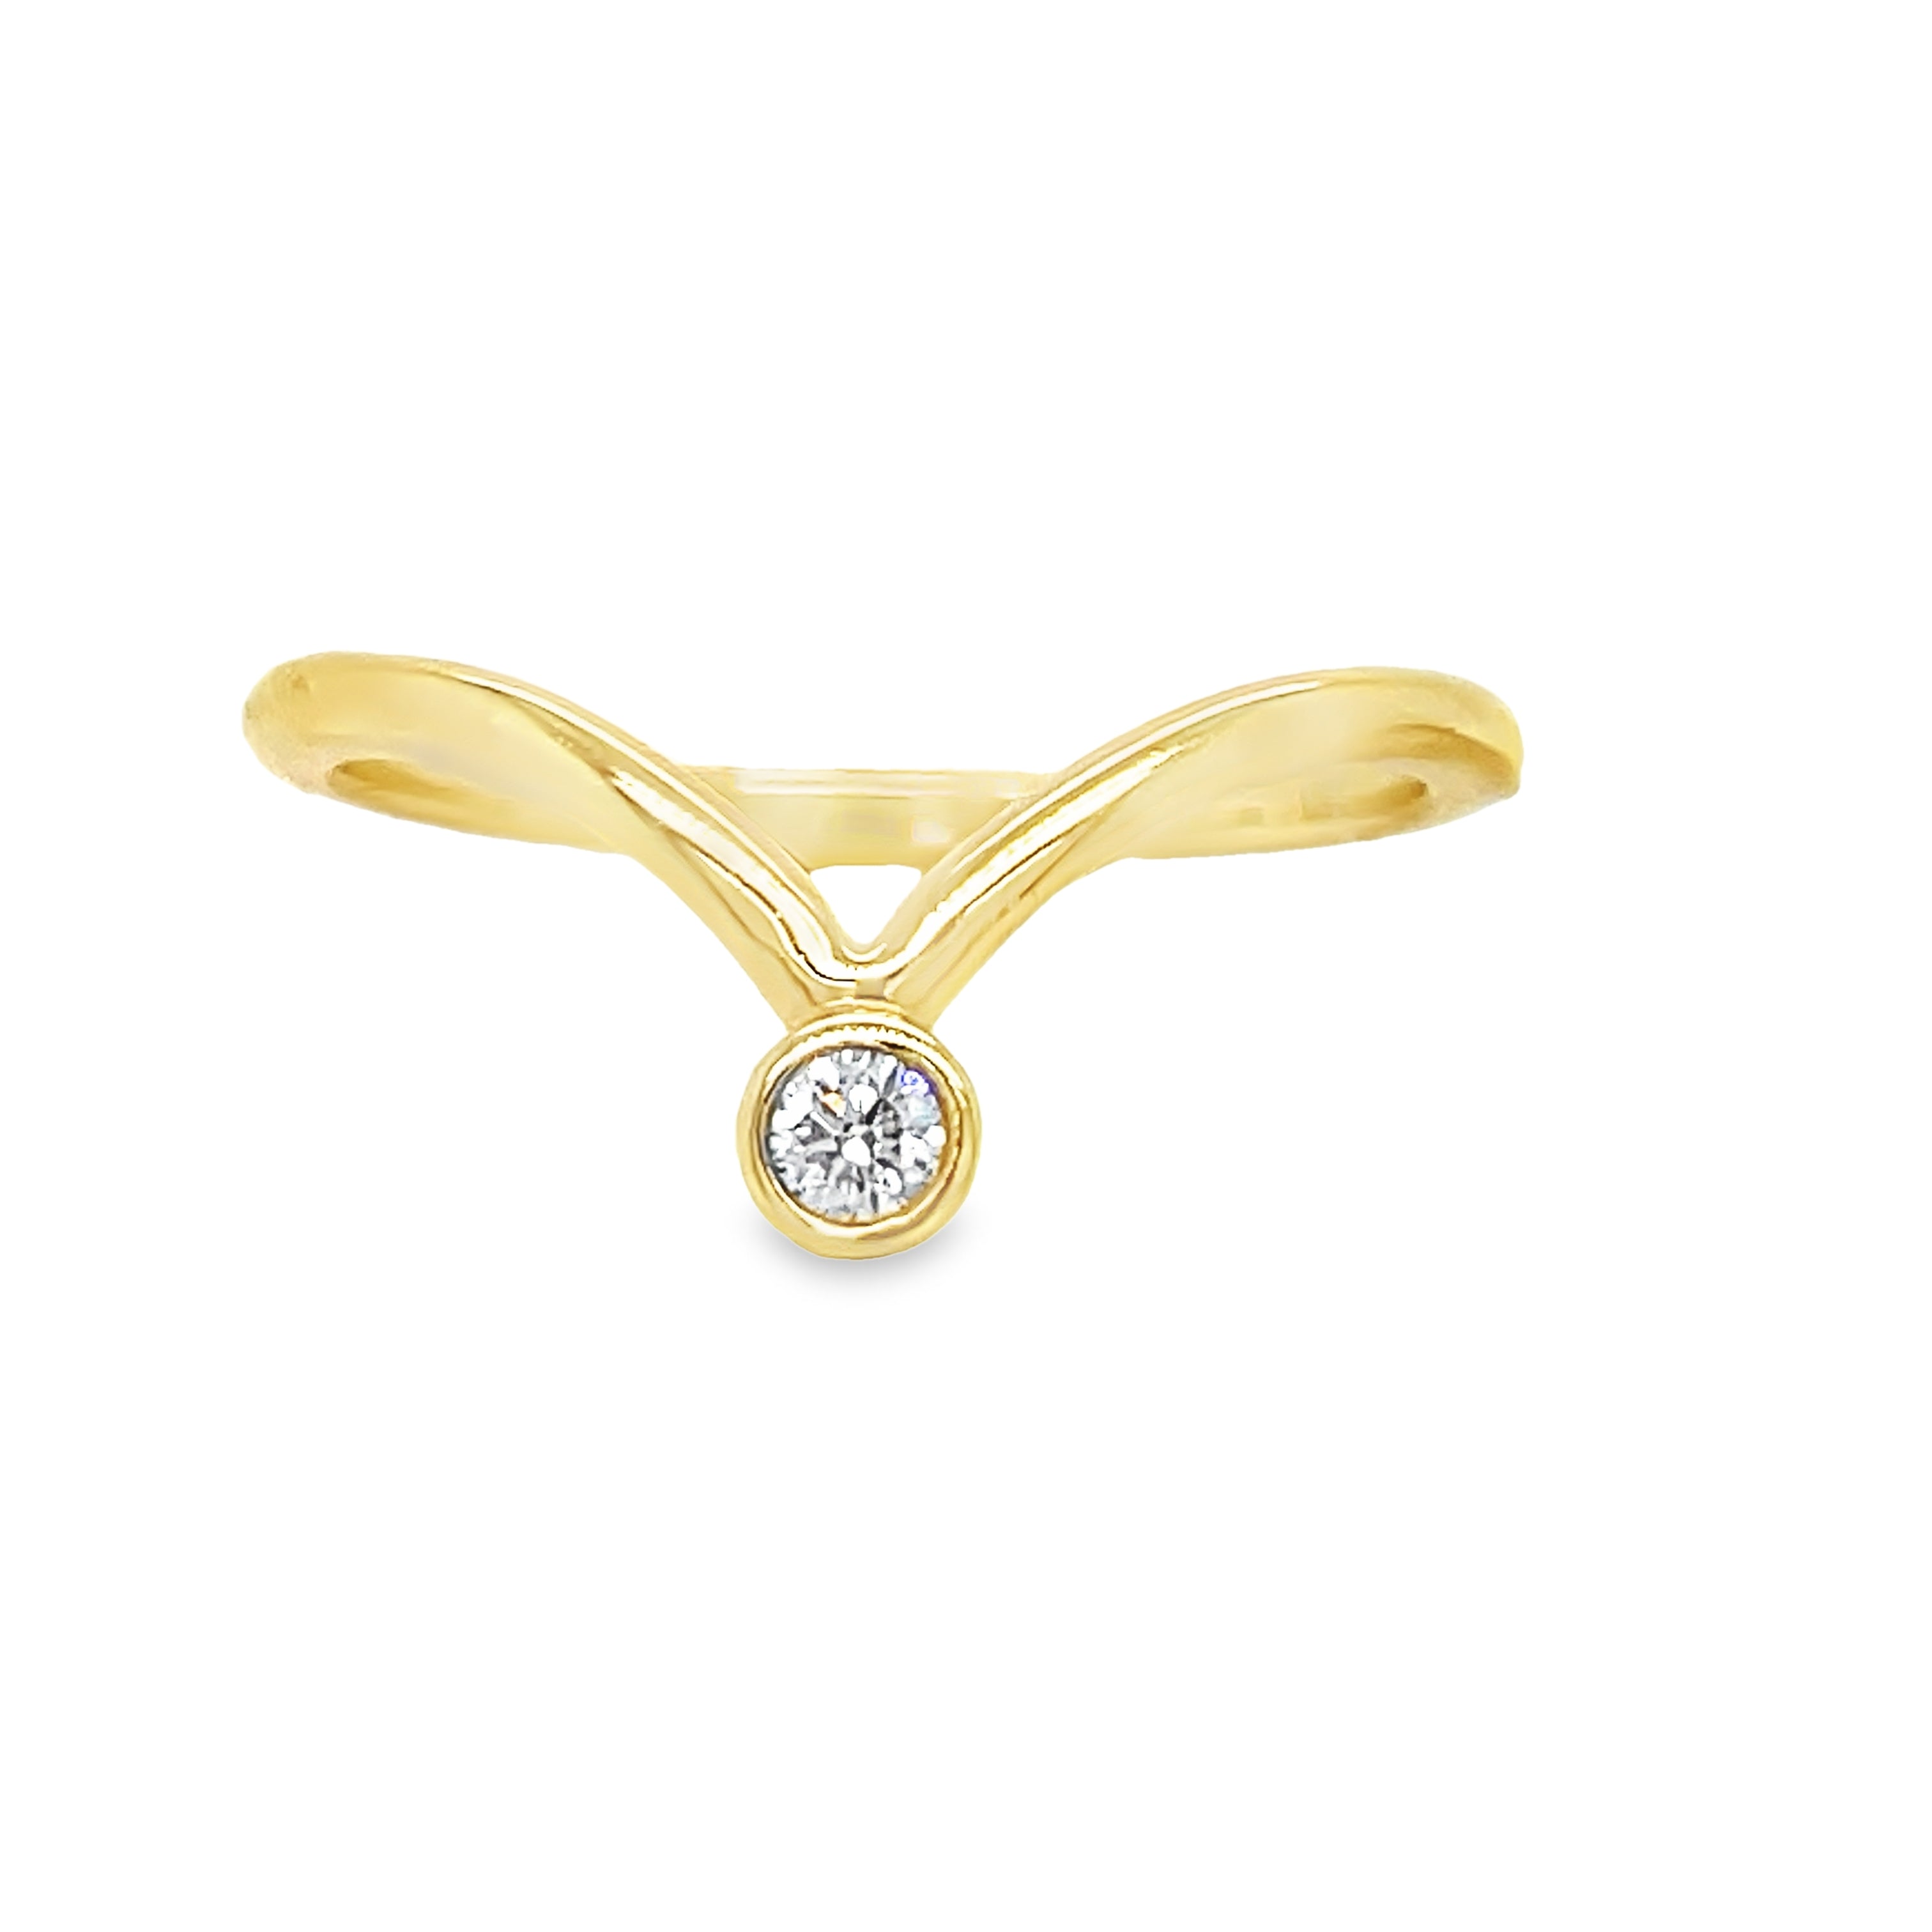 Expertly crafted with 18k yellow gold, this Diamond Solitaire V-Shape ring features a sparkling round diamond of 0.07 carats. The v-shape style adds a touch of elegance and sophistication. Perfect for adding a subtle statement to any outfit.